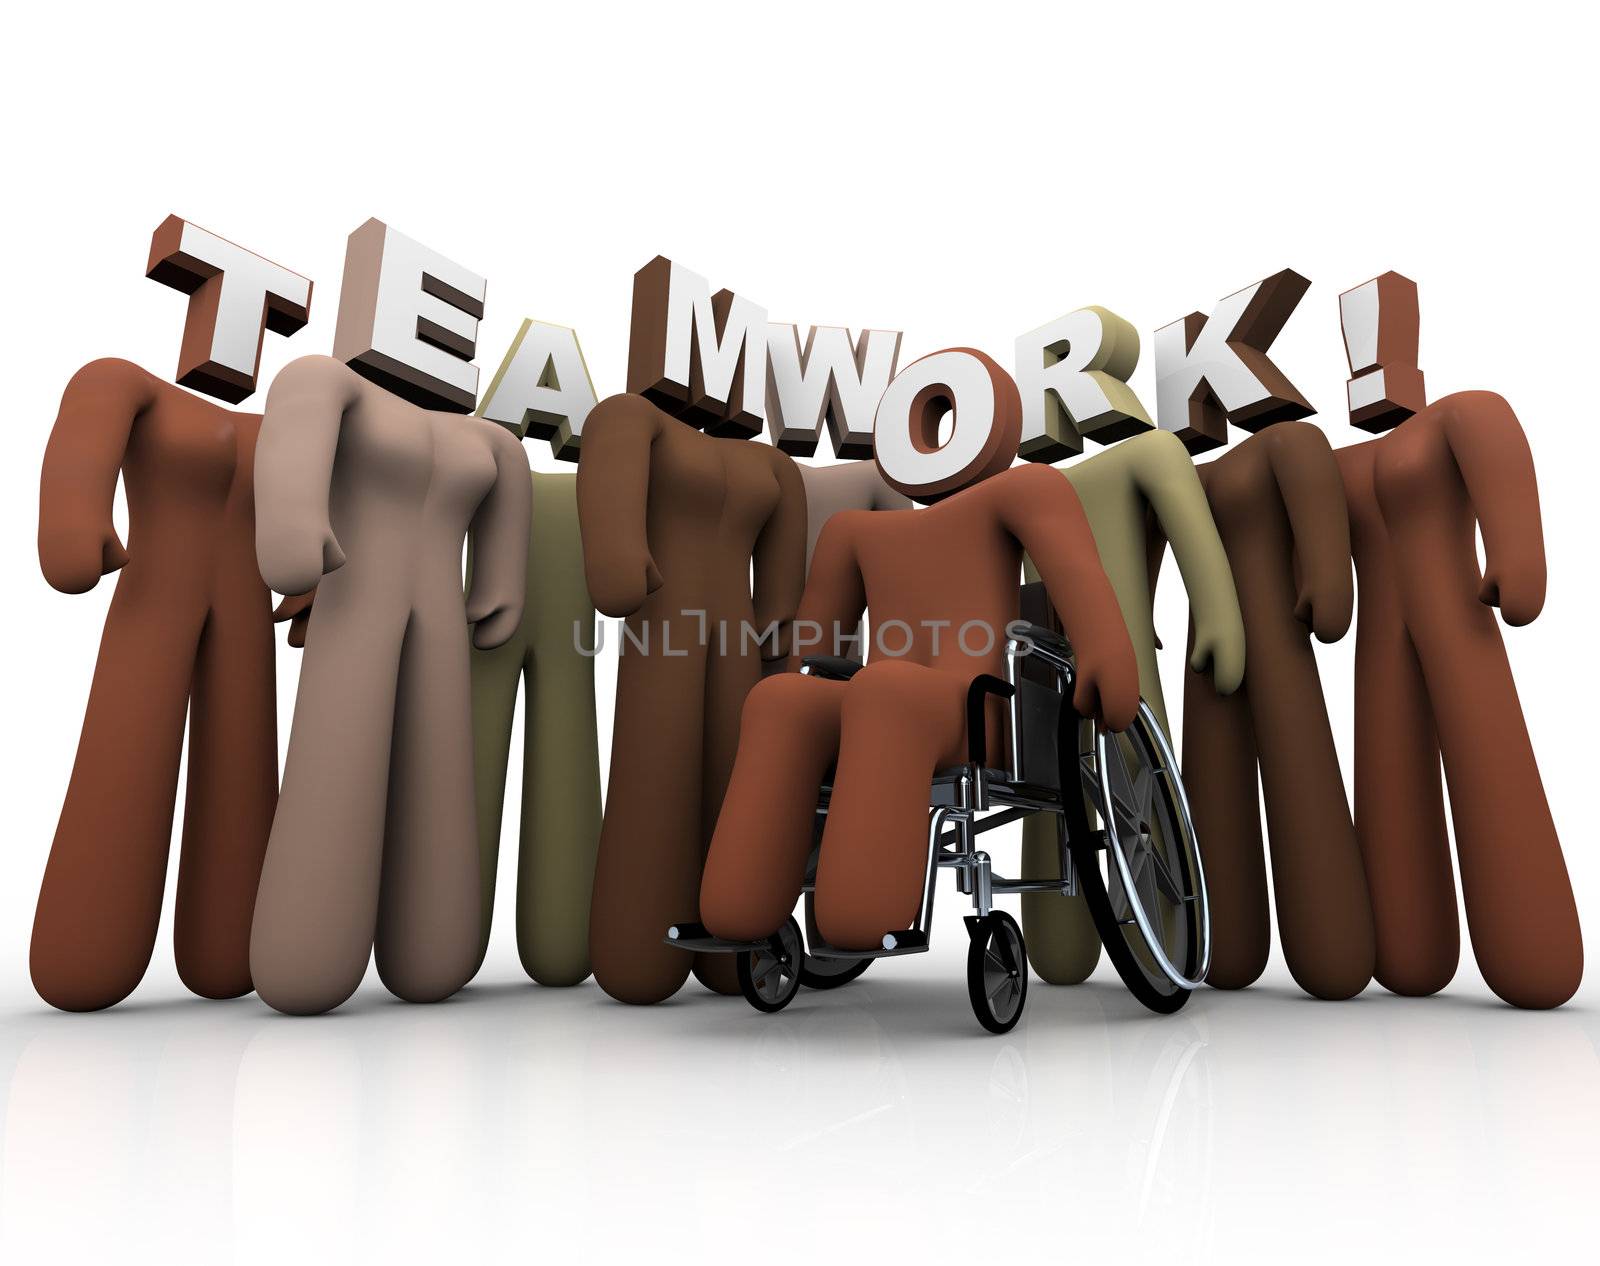 A group of people with different races and abilities, with letters for heads spelling out the word Teamwork, representing the value of putting together a team of co-workers and helpers of various backgrounds and abilities